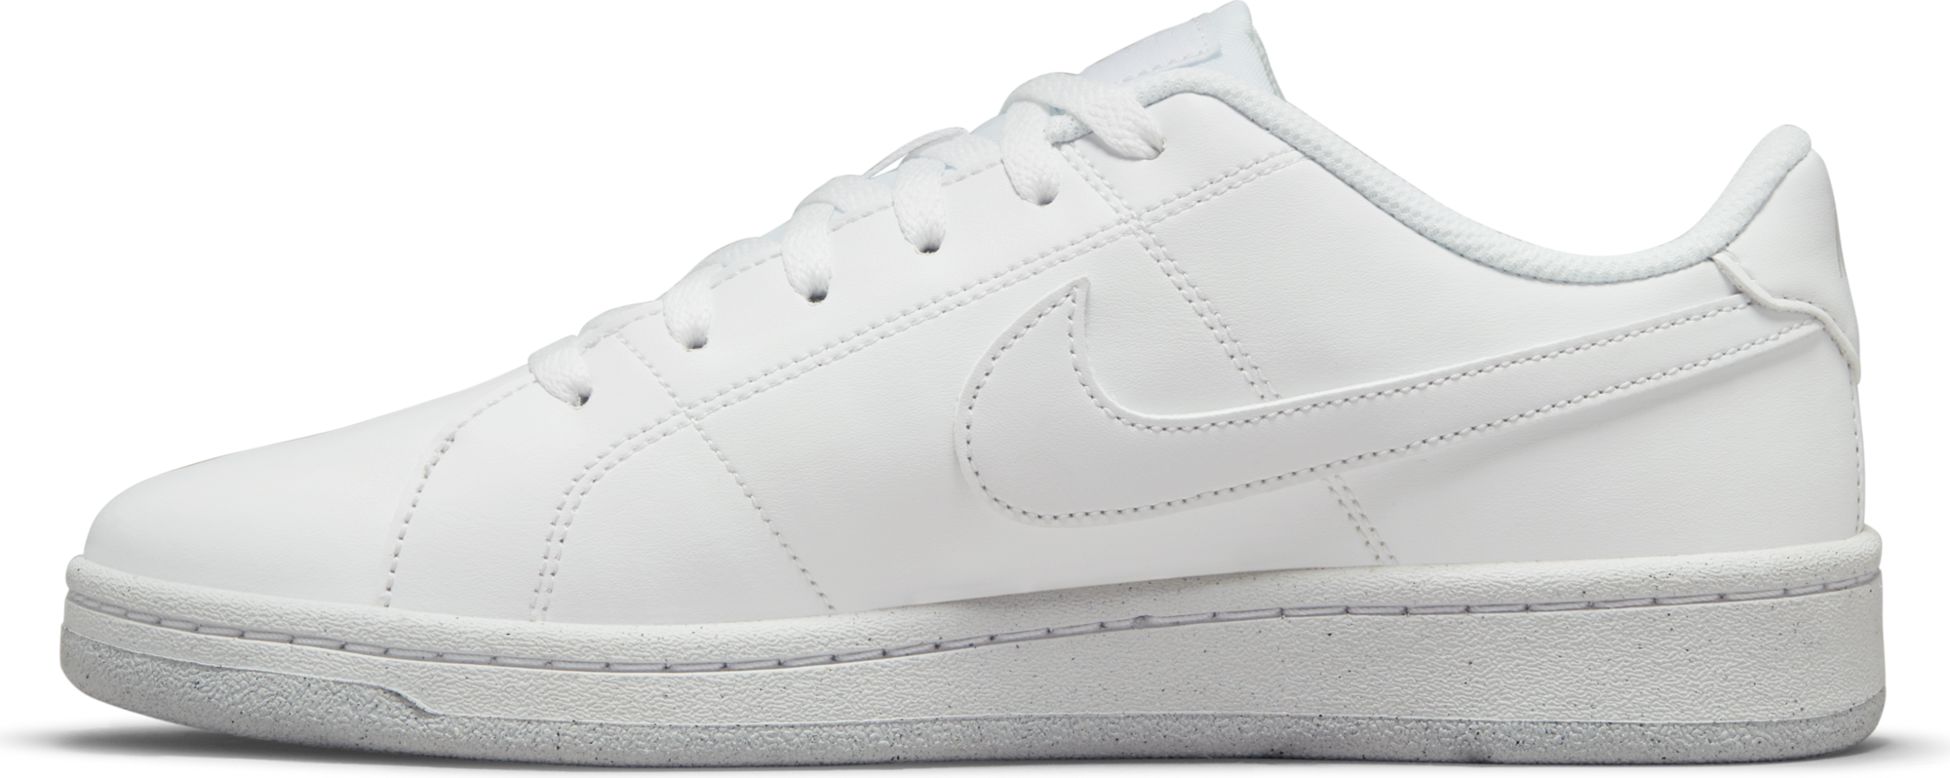 NIKE, W COURT ROYALE 2 BETTER ESSENTIAL